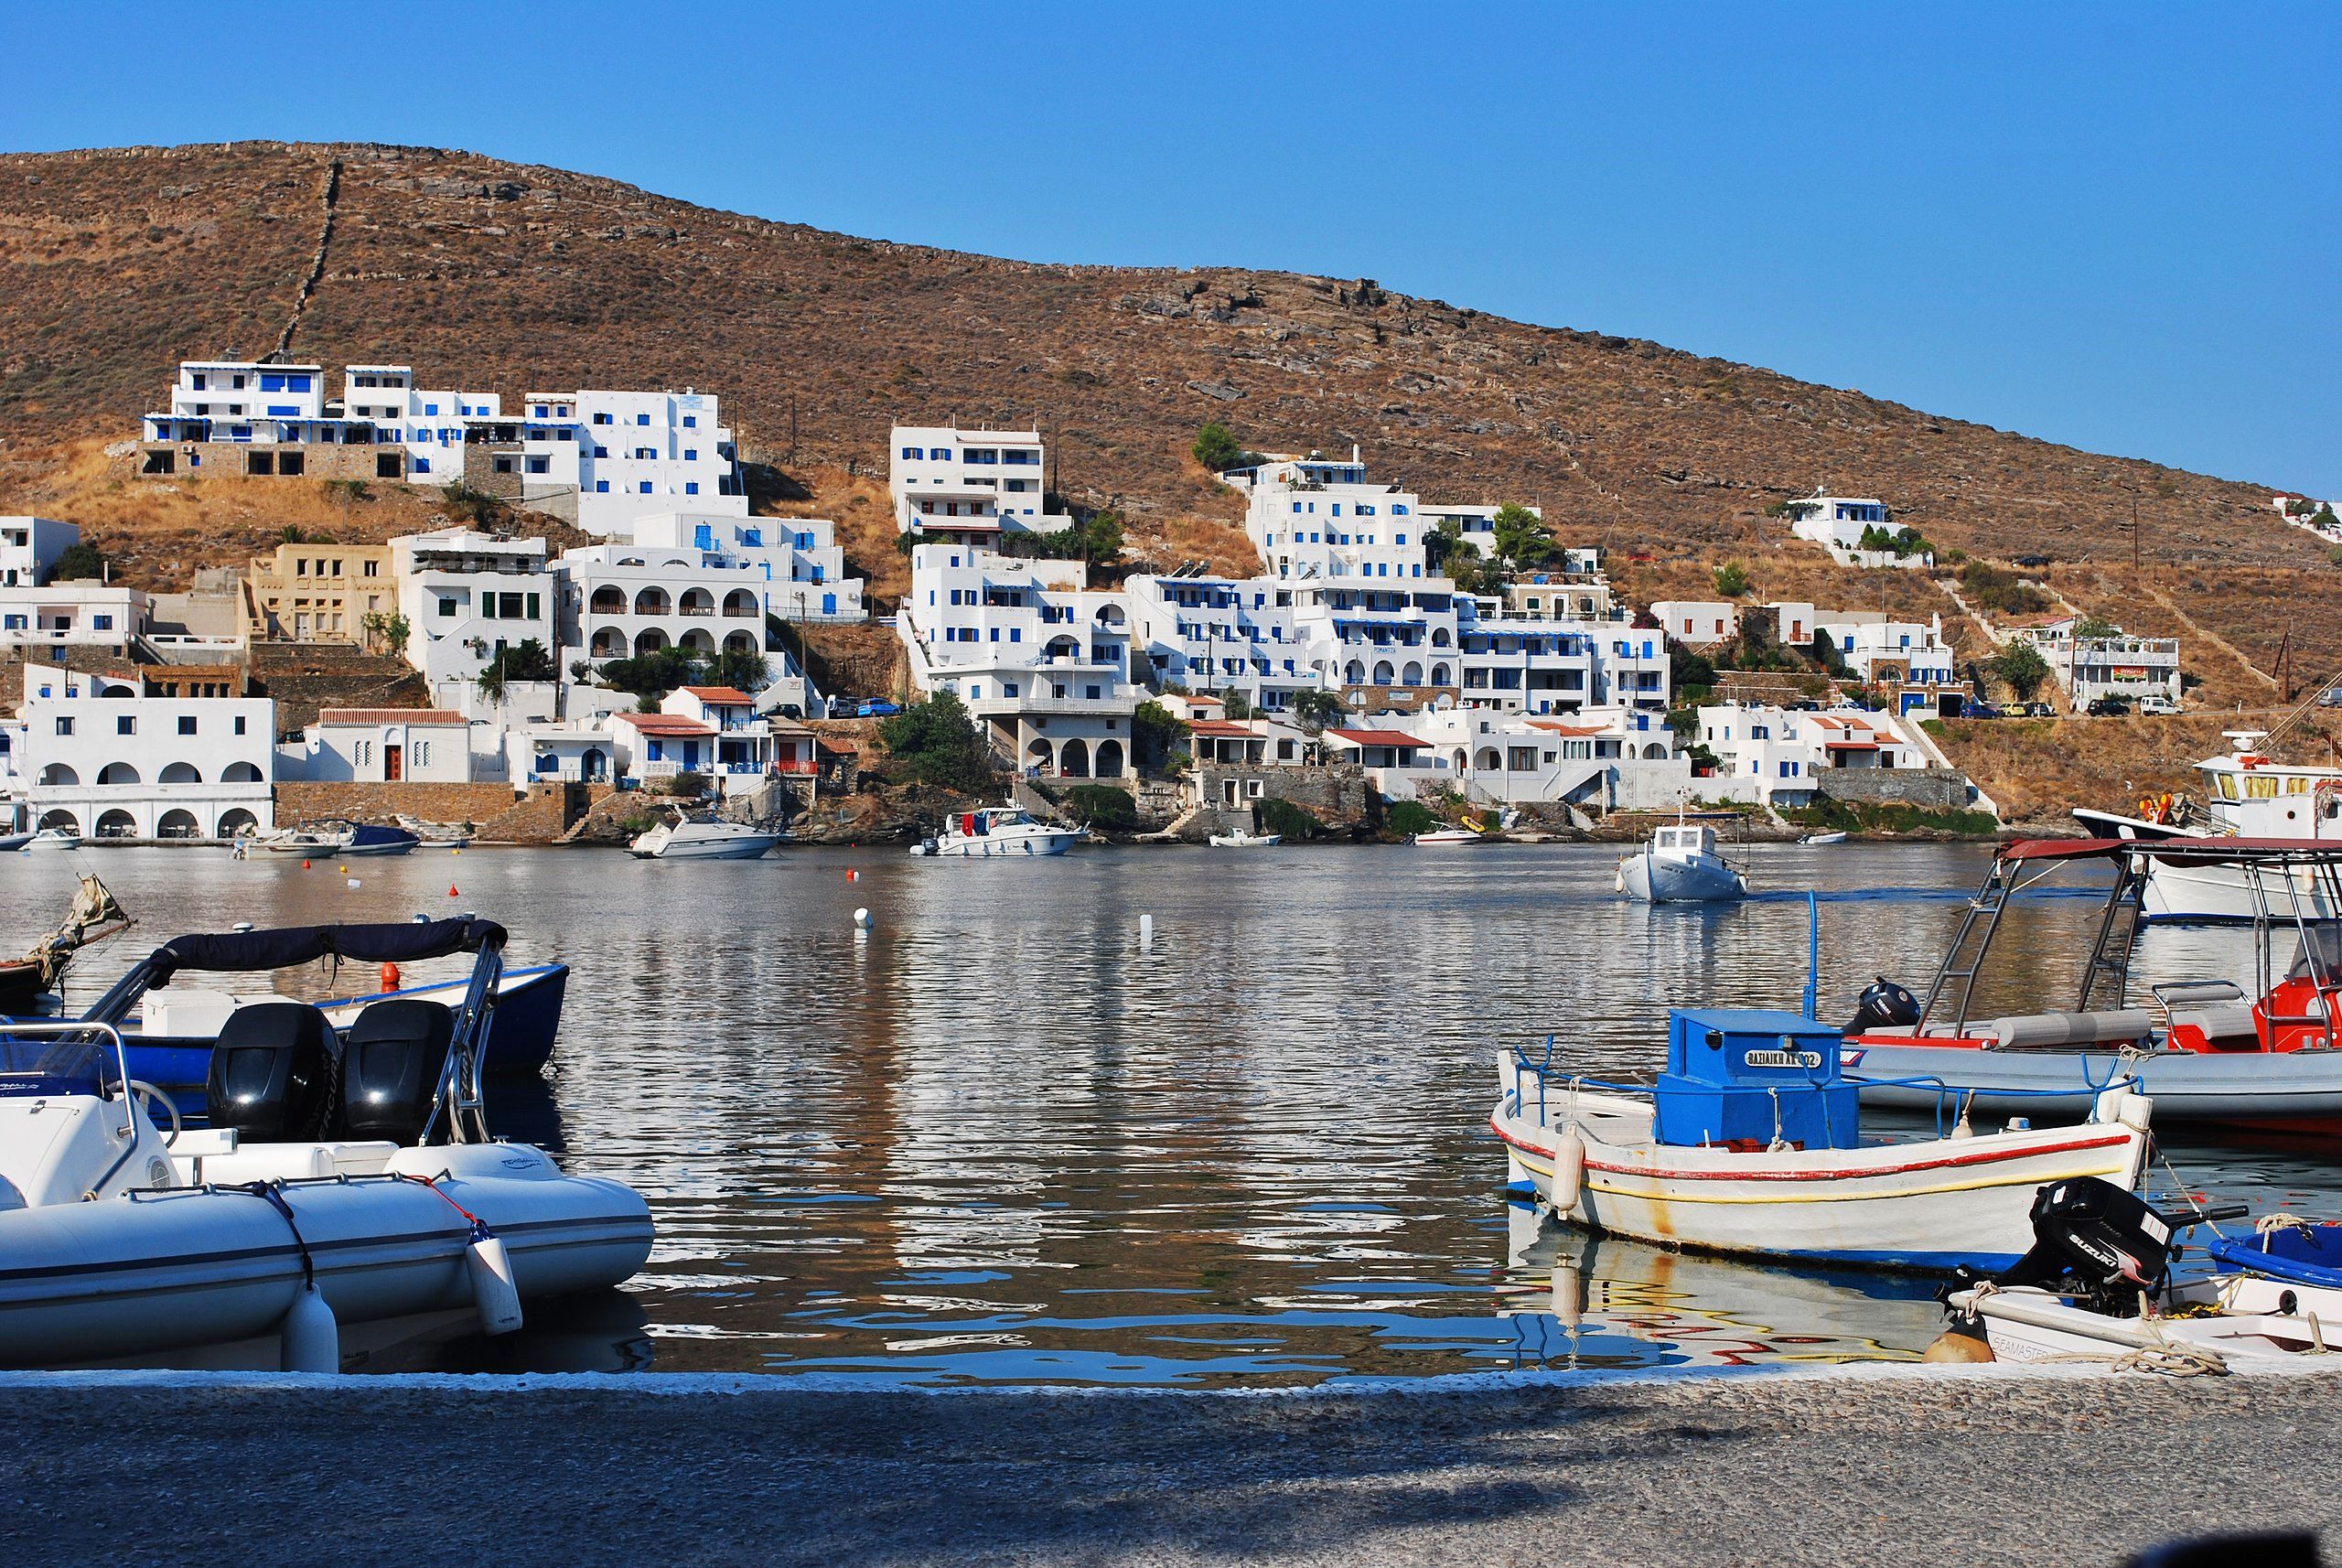 Visit Kythnos in the Cyclades of Greece